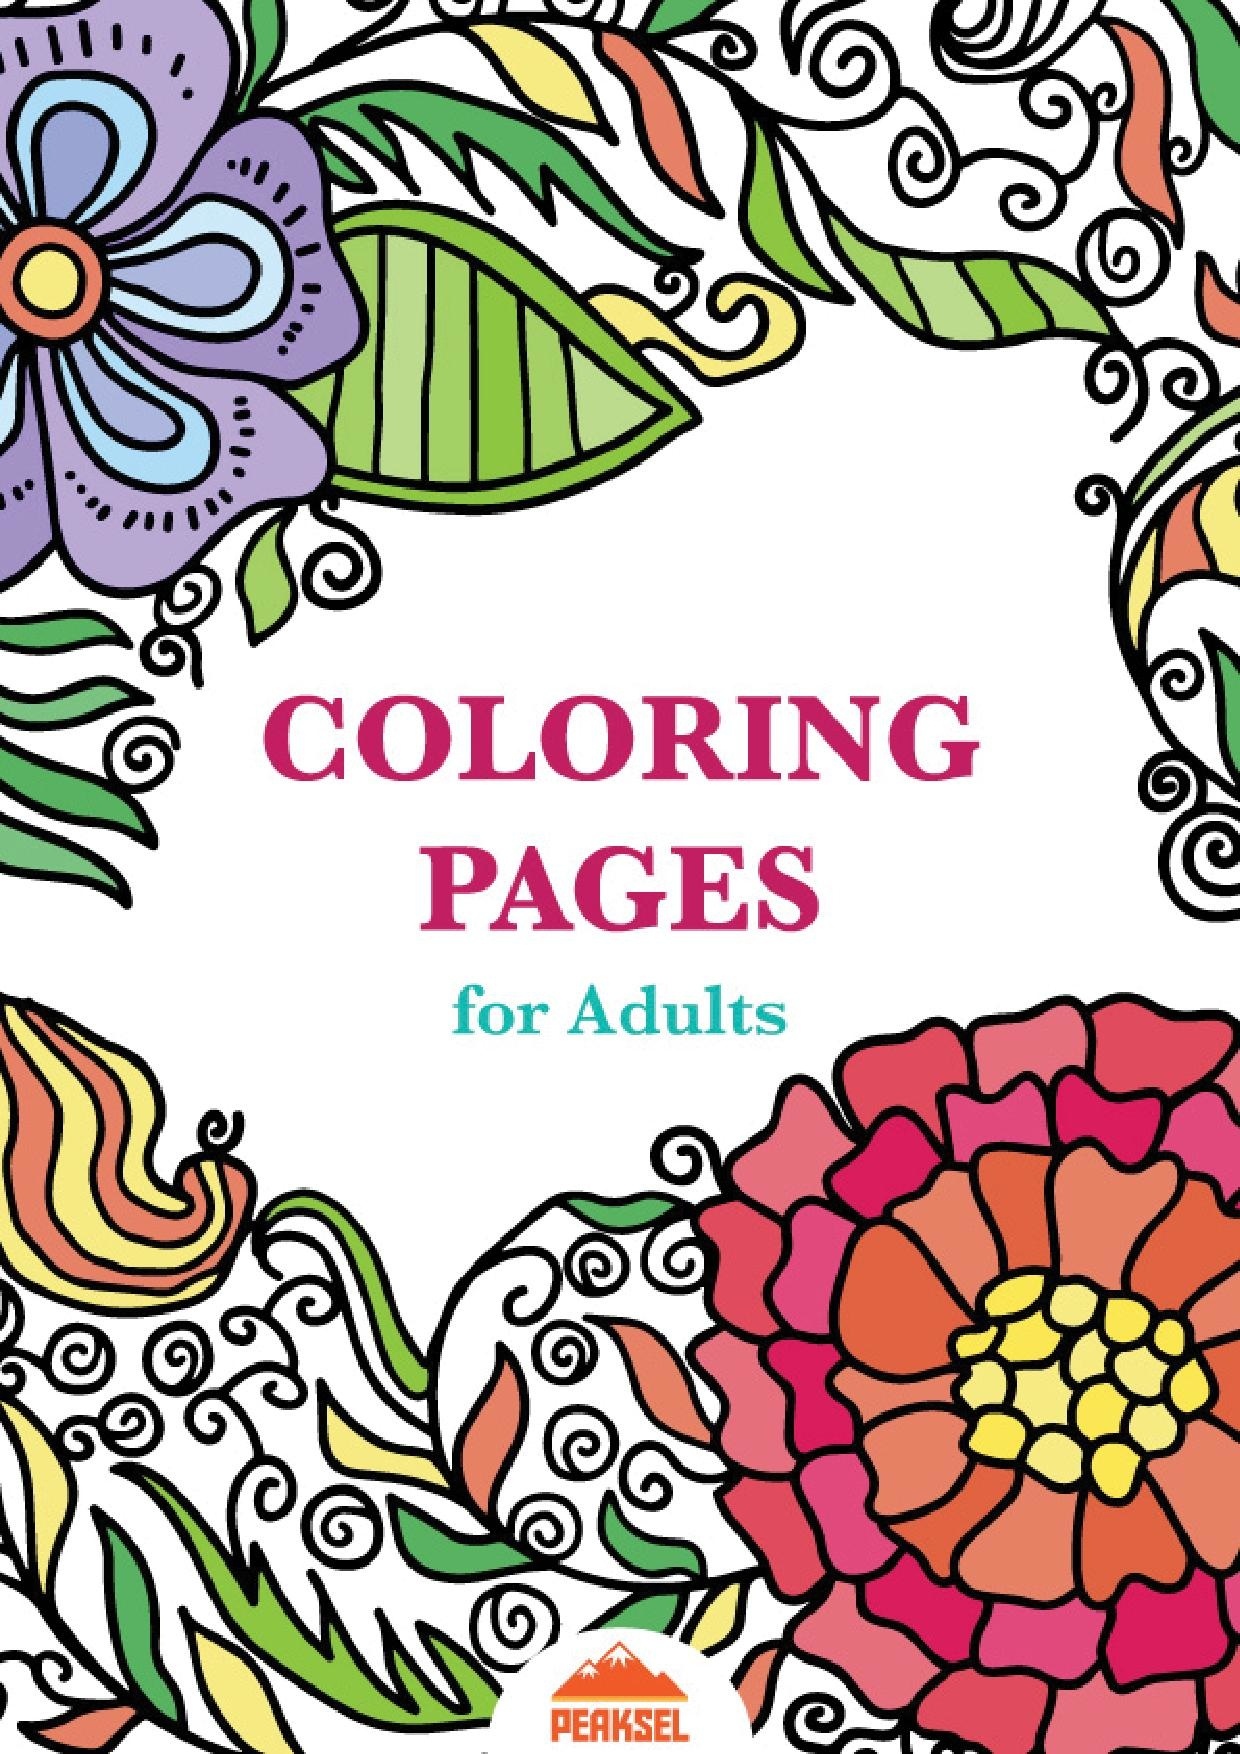 File:printable Coloring Pages For Adults - Free Adult Coloring Book - Free Printable Coloring Pages For Adults Pdf